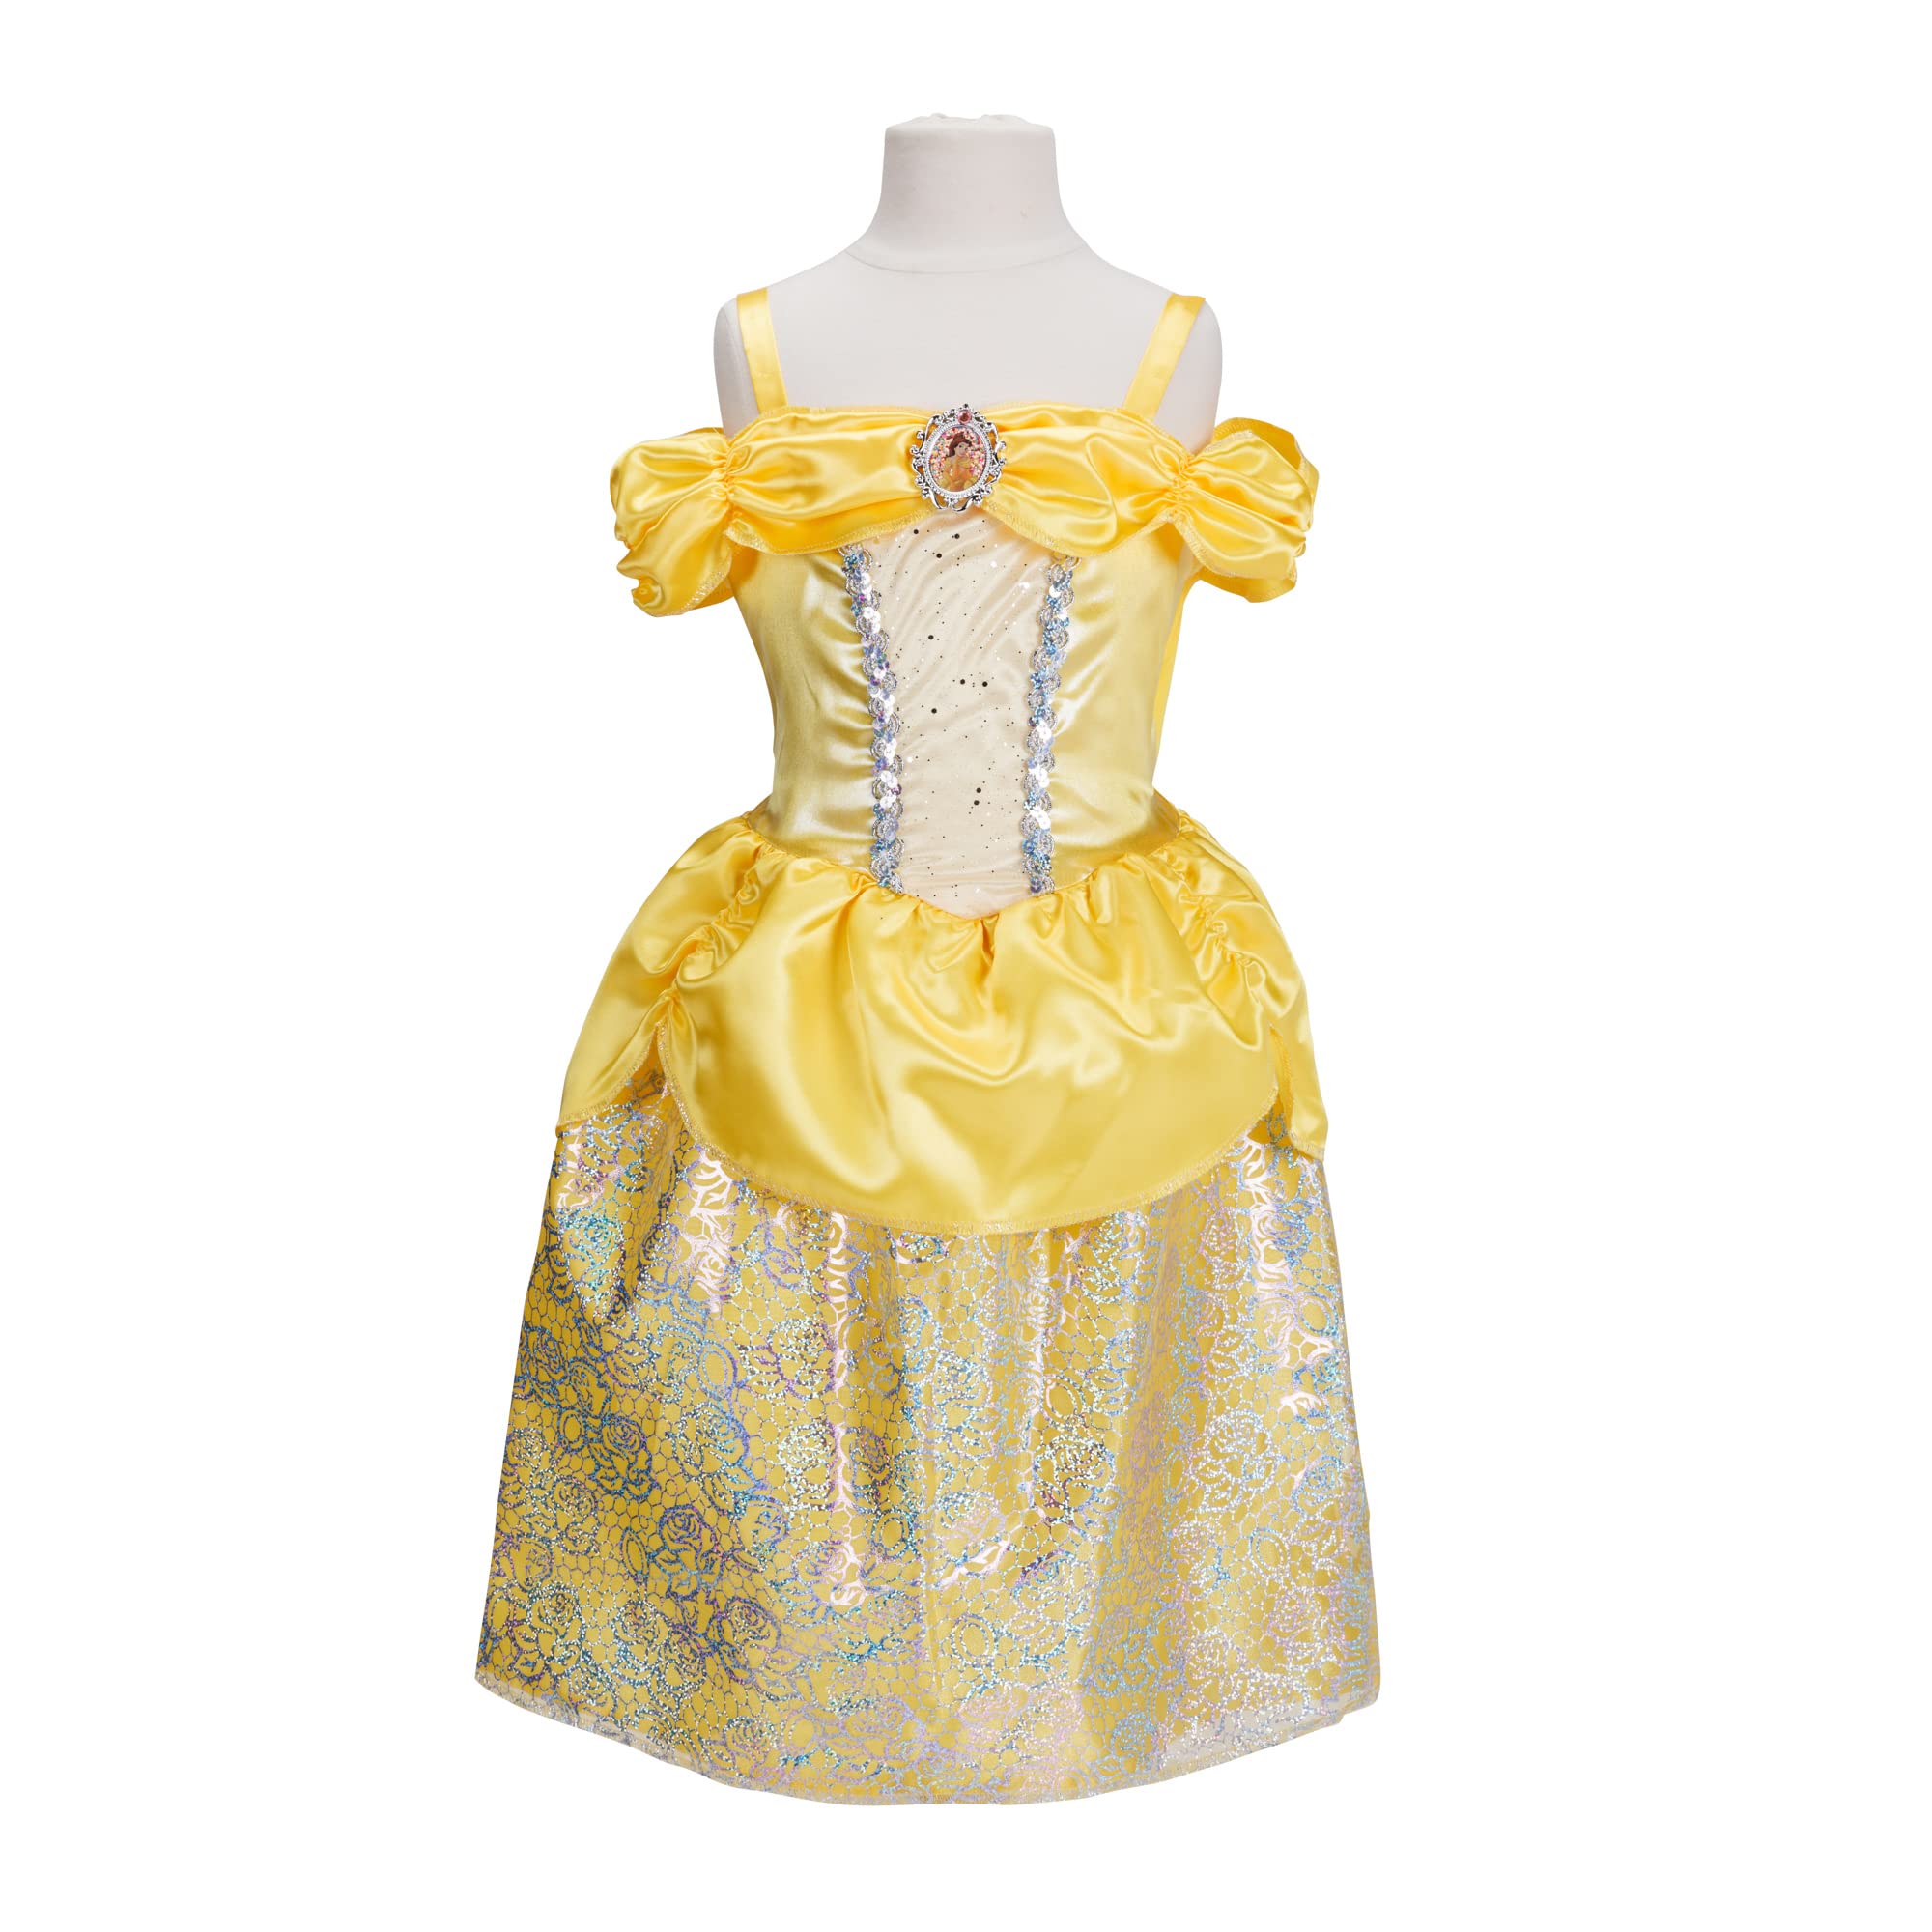 Disney Princess Disney 100 Belle Dress Costume for Girls, Perfect for Party, Halloween Or Pretend Play Dress Up Child Size 4-6X